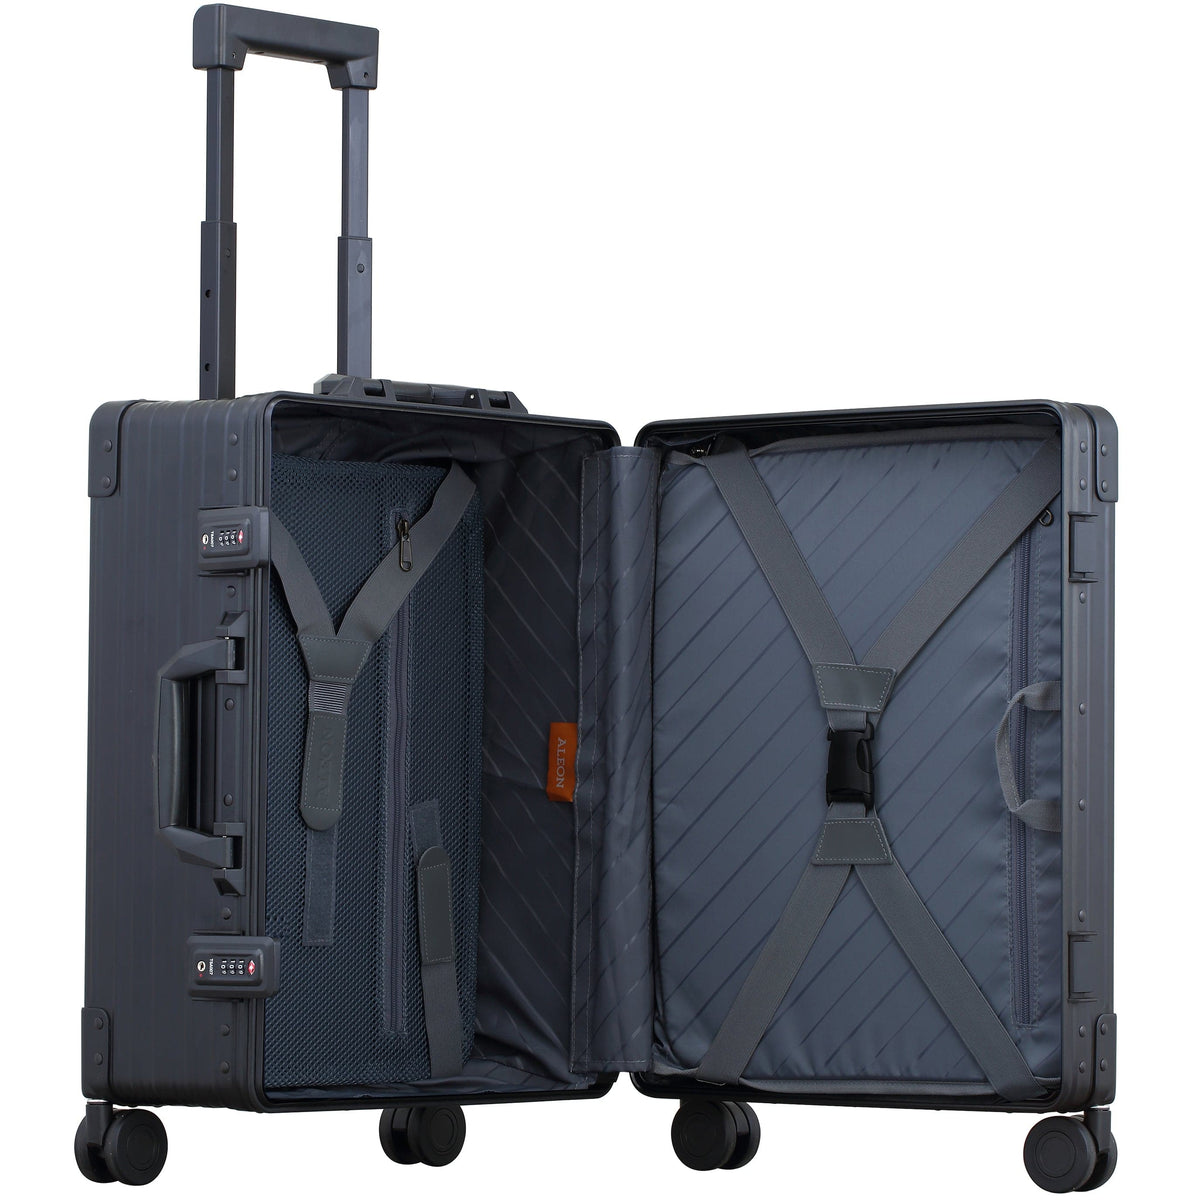 Aleon Domestic 21" Carry-On With Shirt & Pant Packer